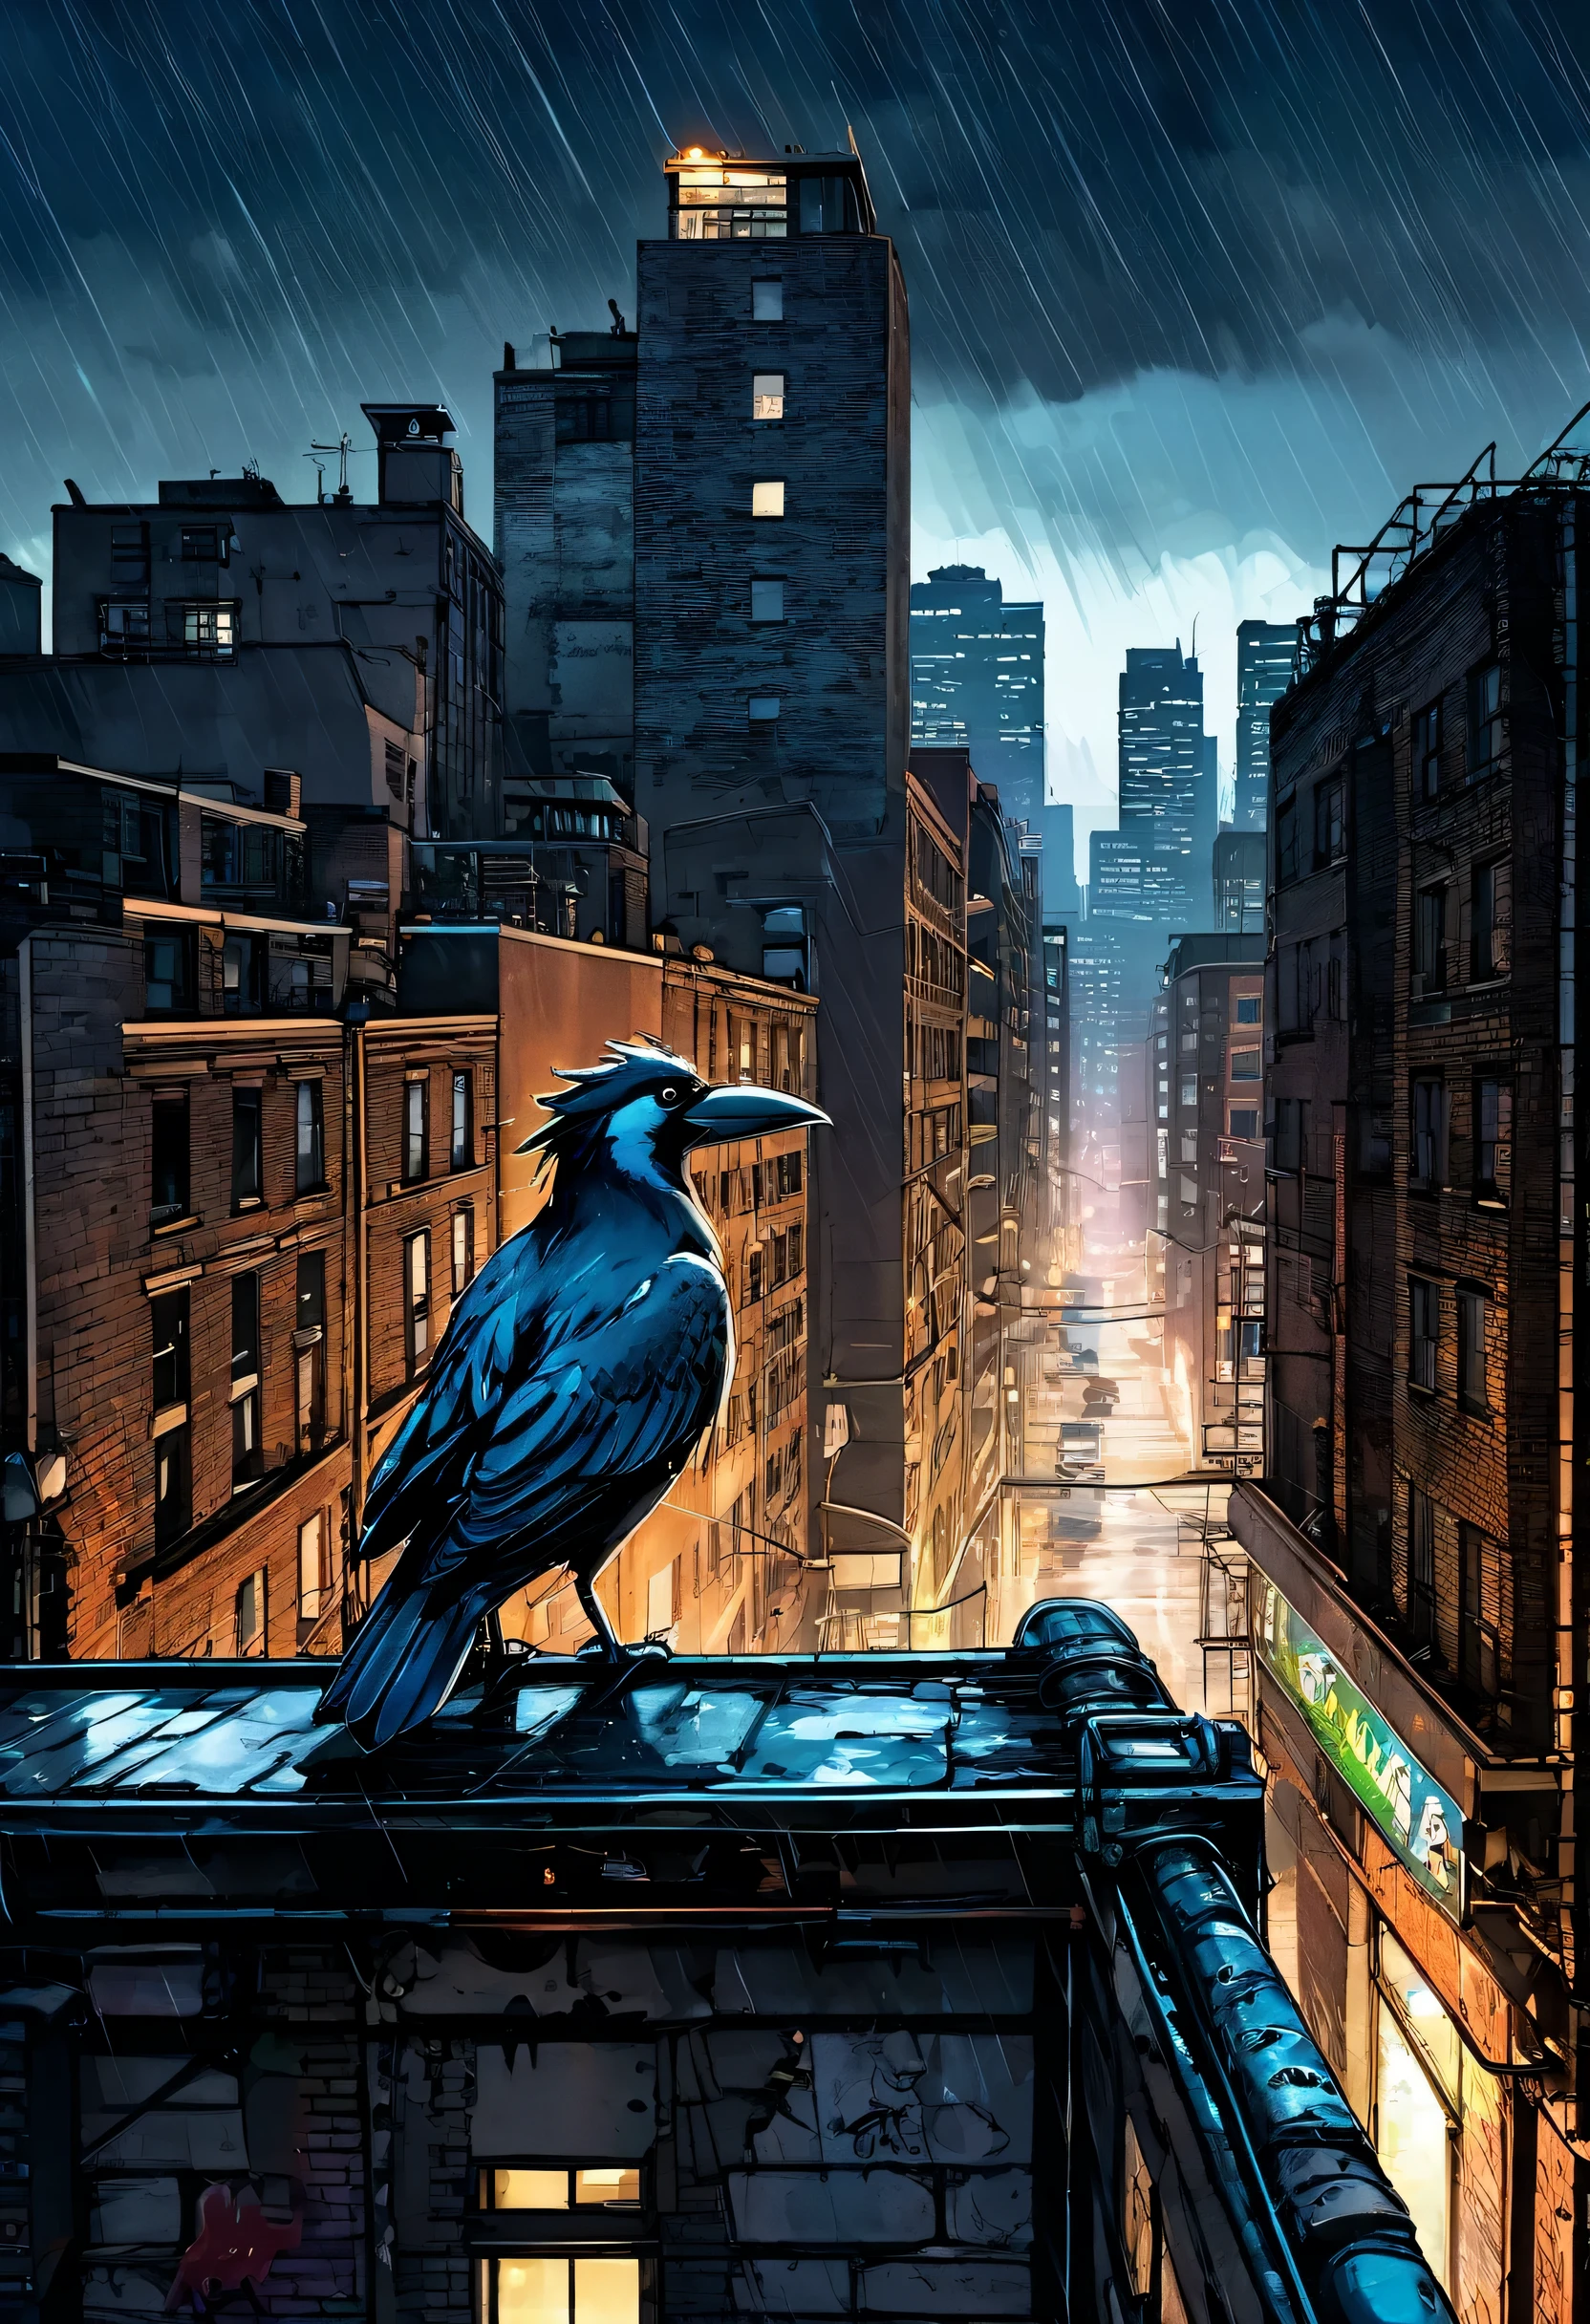 Urban Explorer, perched on a weathered rooftop, overlooking a bustling cityscape, holding a shiny object in its beak, gazing intently, with a hint of mischievousness in its eyes. Urban alleyway, street art murals, tagged graffiti, scattered trash, fire escapes, rusty pipes, broken windows, glowing neon signs, distant police sirens, drizzling rain. Gritty, urban, eerie, a touch of noir. Low-angle shot, harsh lighting, grainy texture, high contrast, shallow depth of field, dark vignetted edges